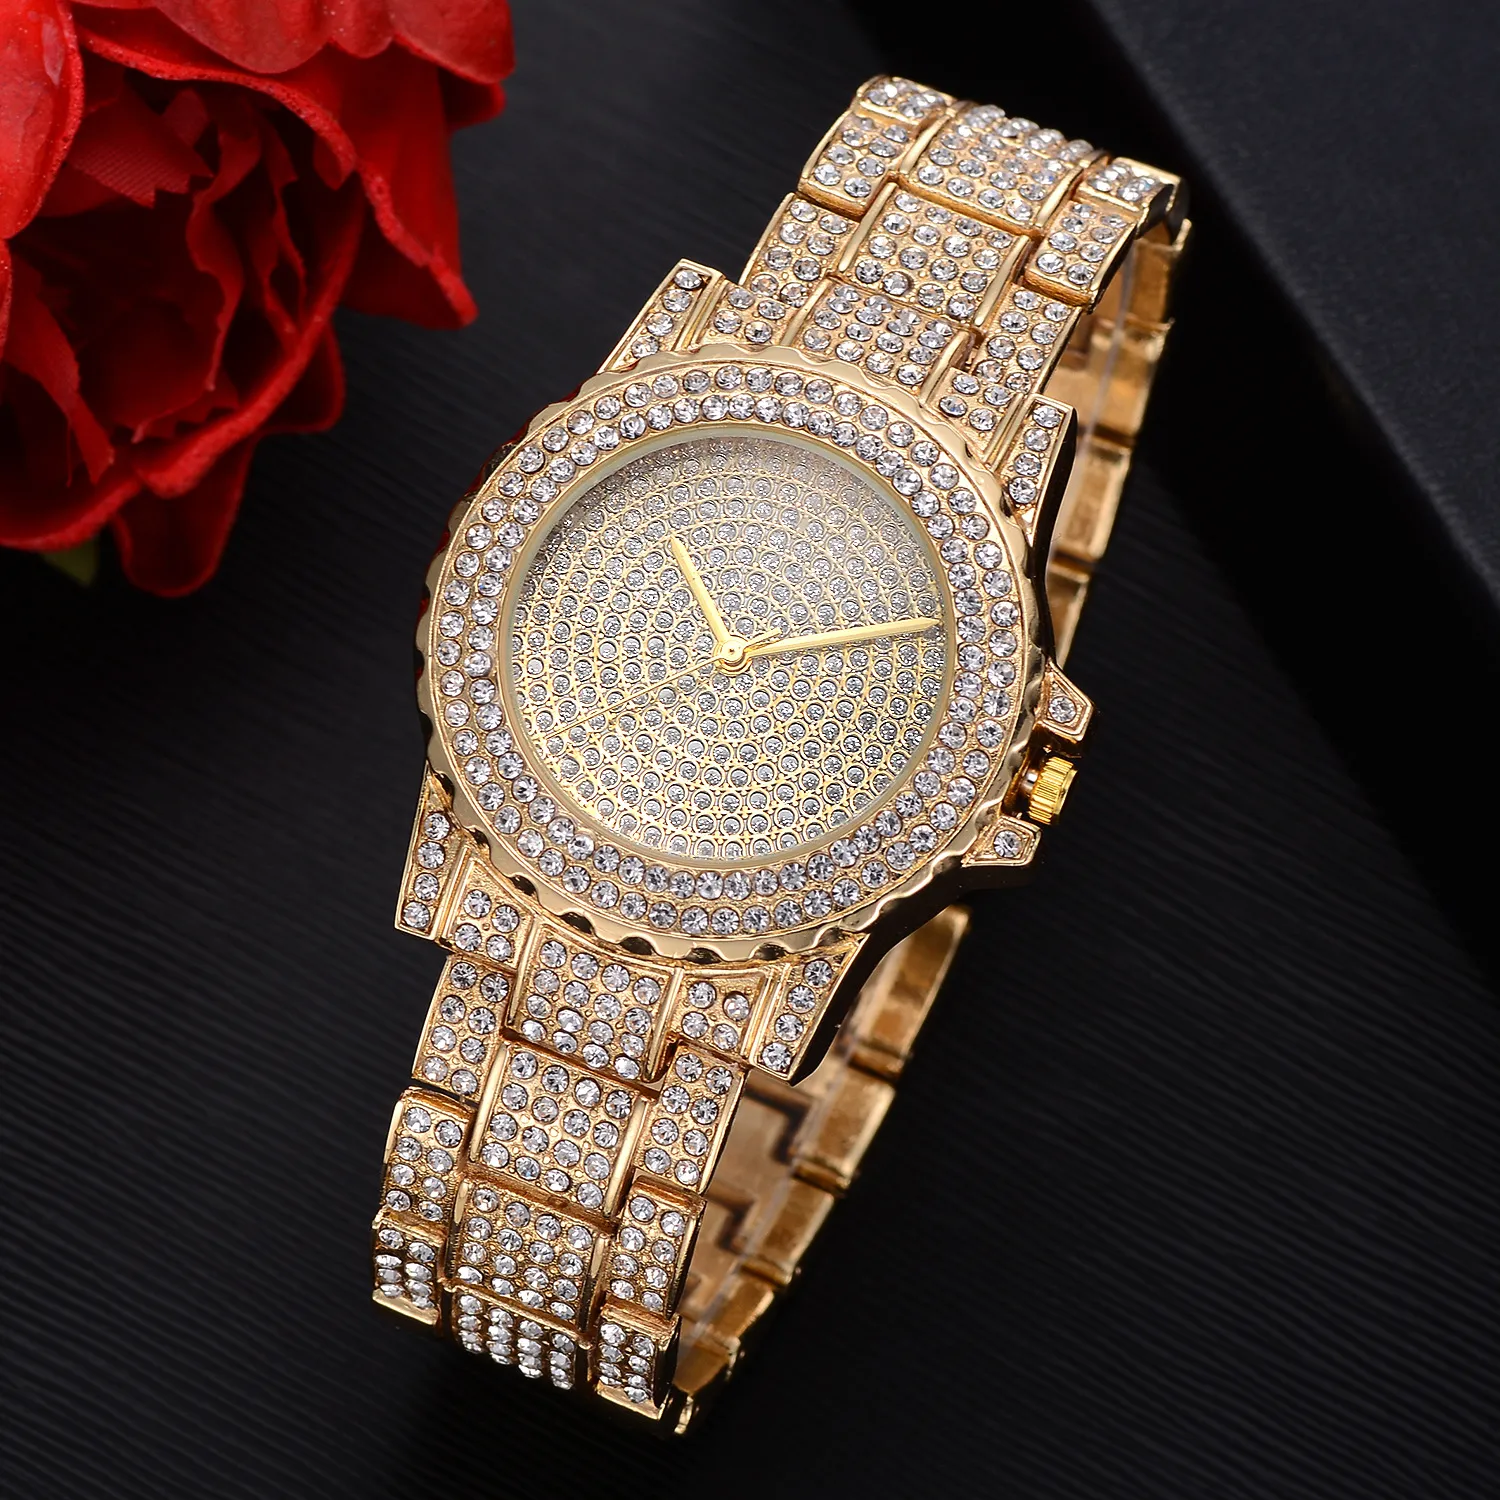 Top Mens Watches Out Out Kwarc Ruch All Diamond Watch Casual Dress Sukiety Wristwatch Waterproof Waterproof Clock for Lover Anal257Q